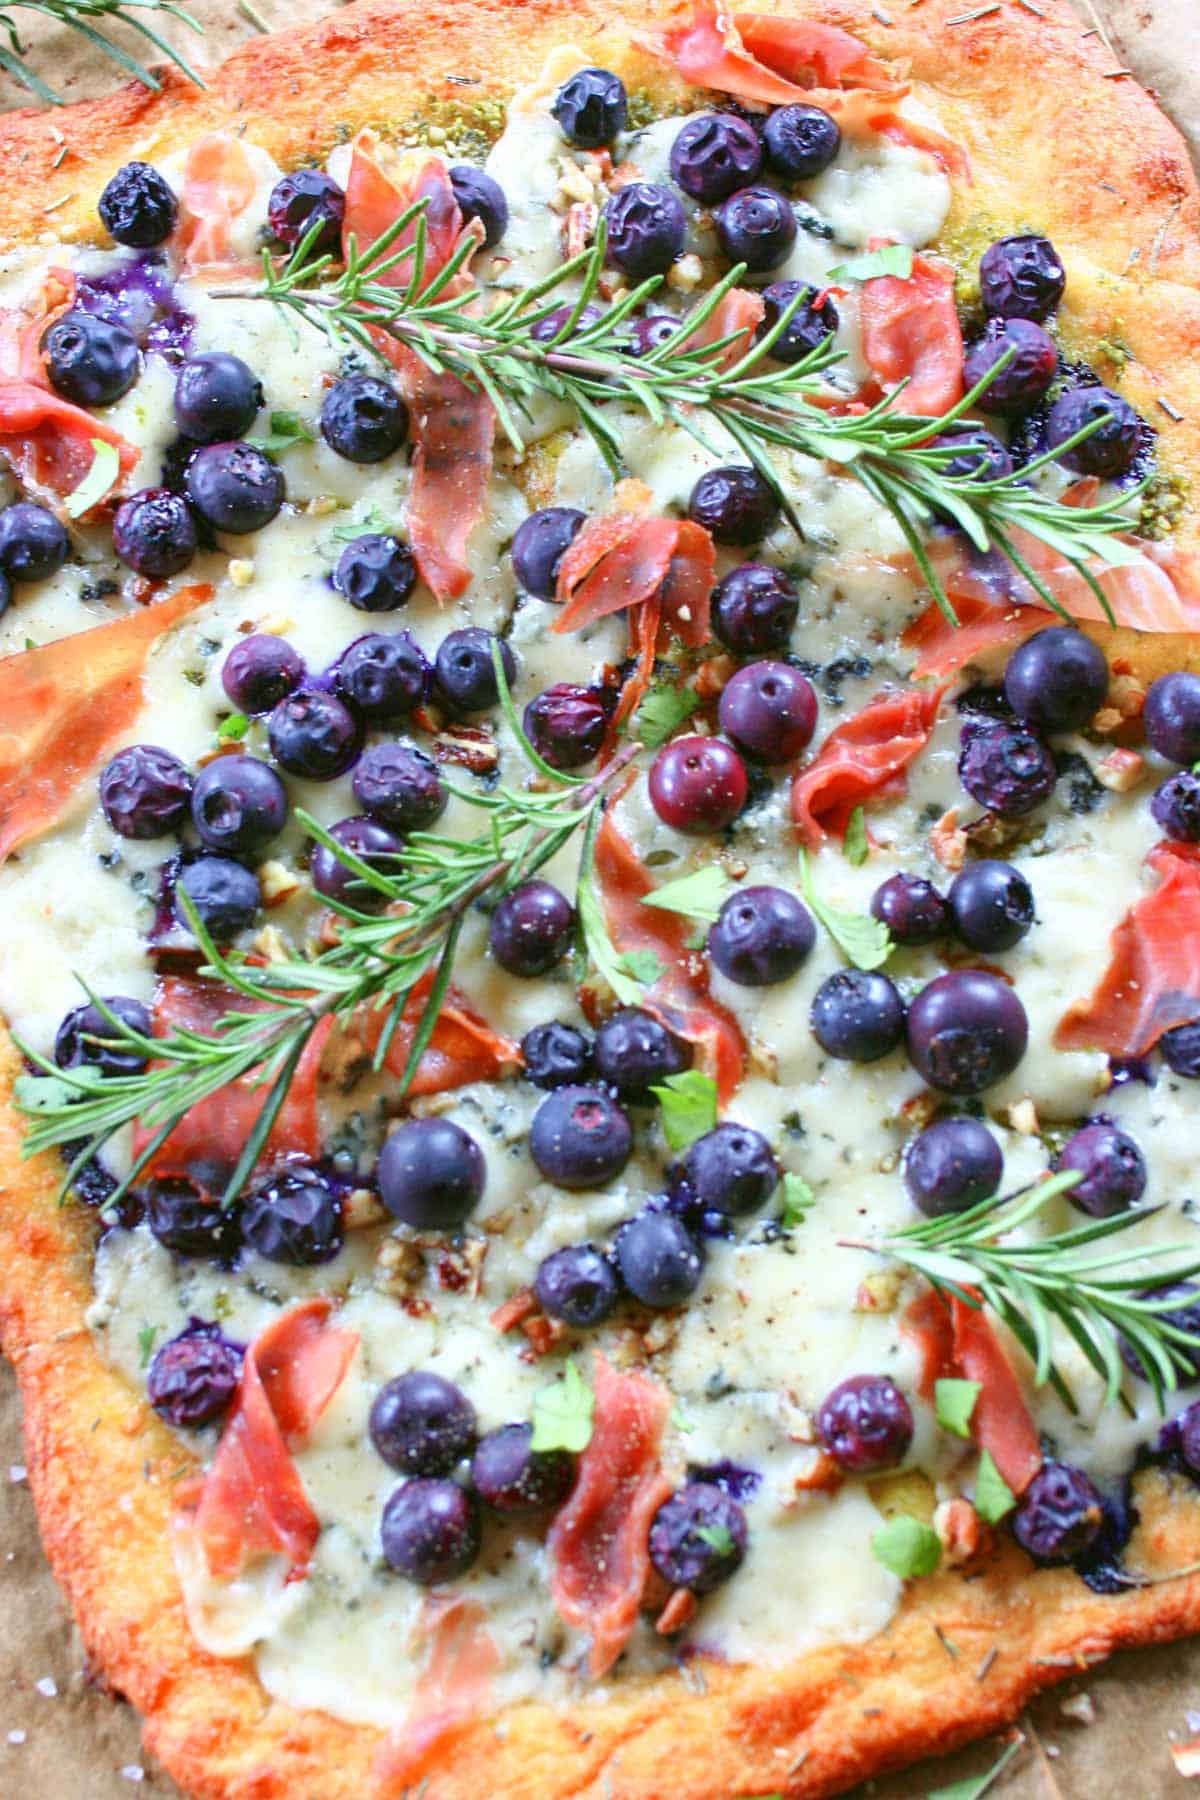 Blueberry pizza with blueberries and fresh rosemary sprigs on top.